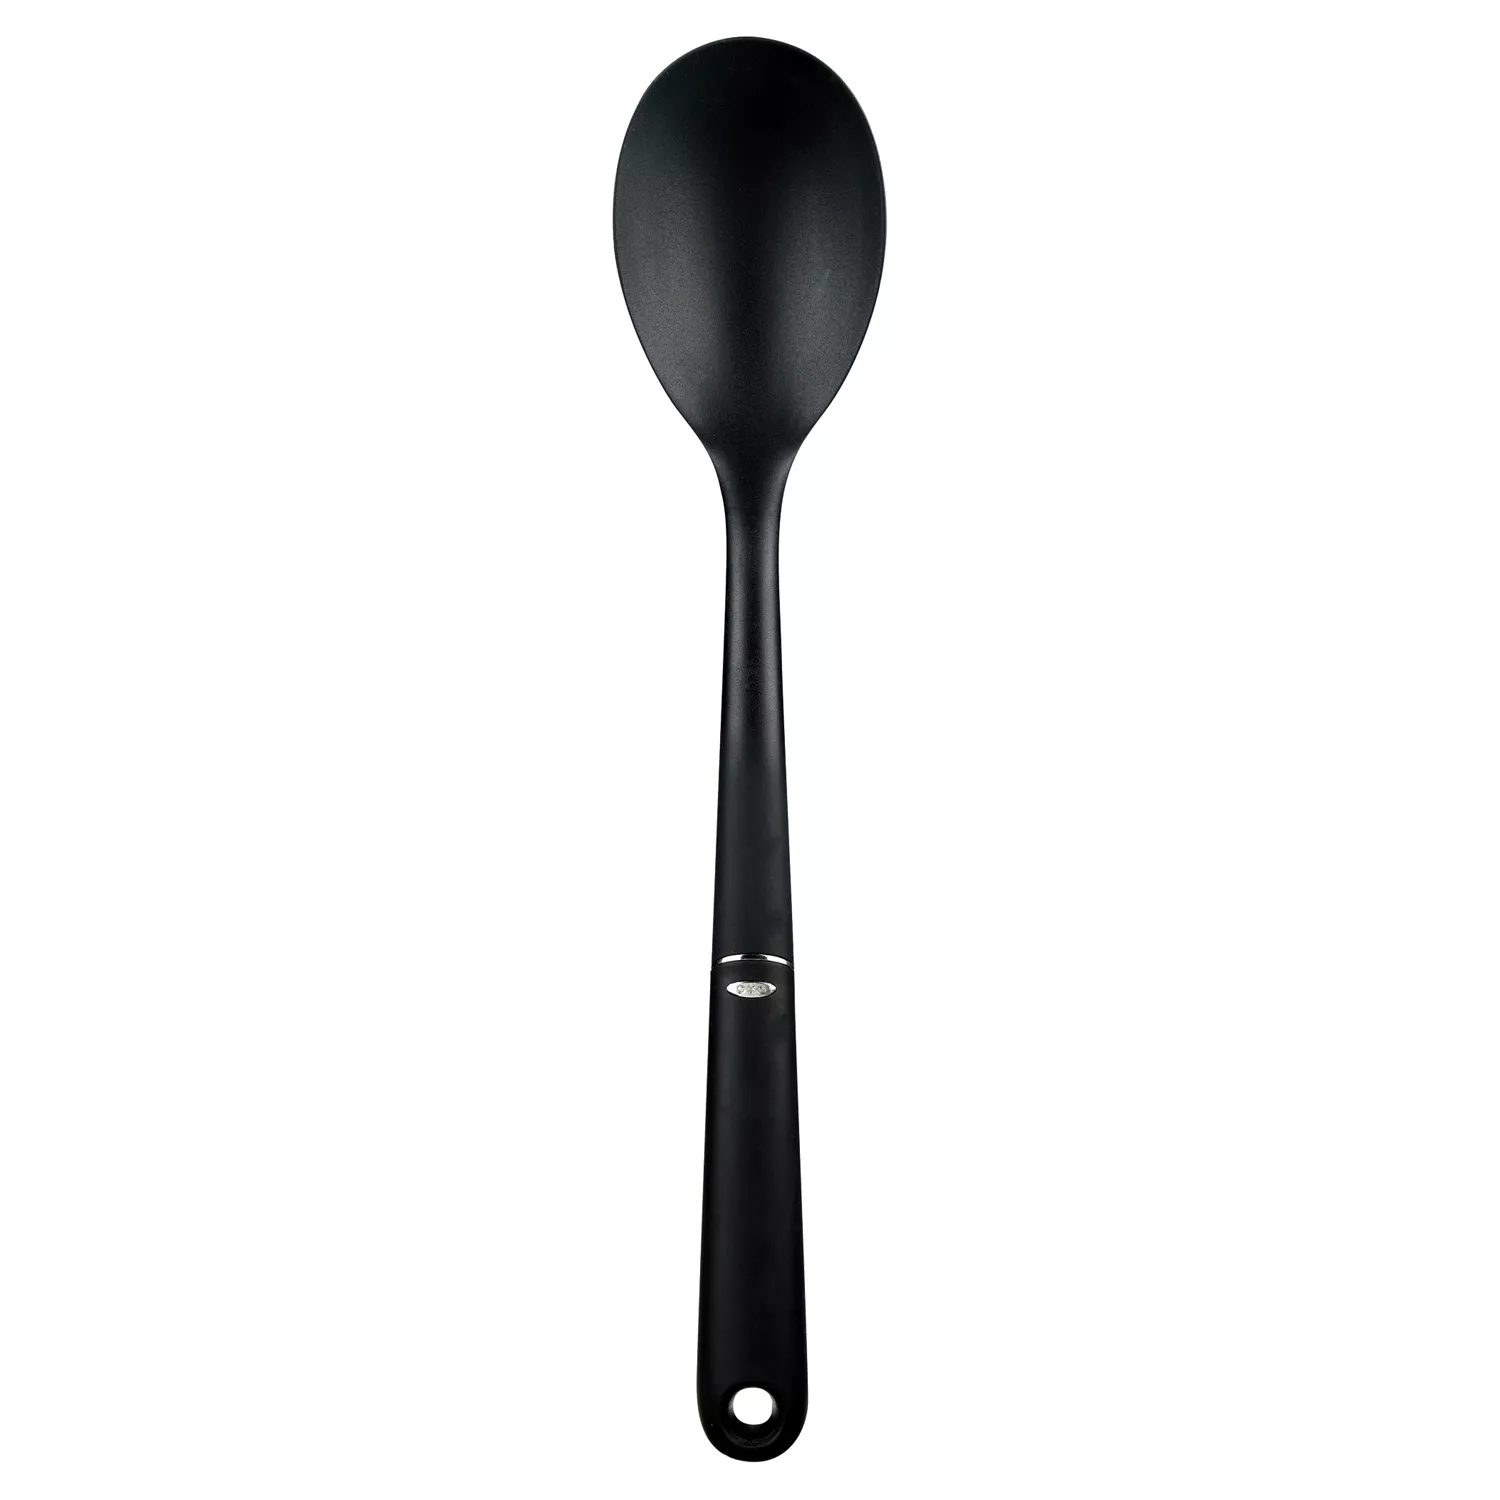  OXO Good Grips Silicone Slotted Spoon, us:one size